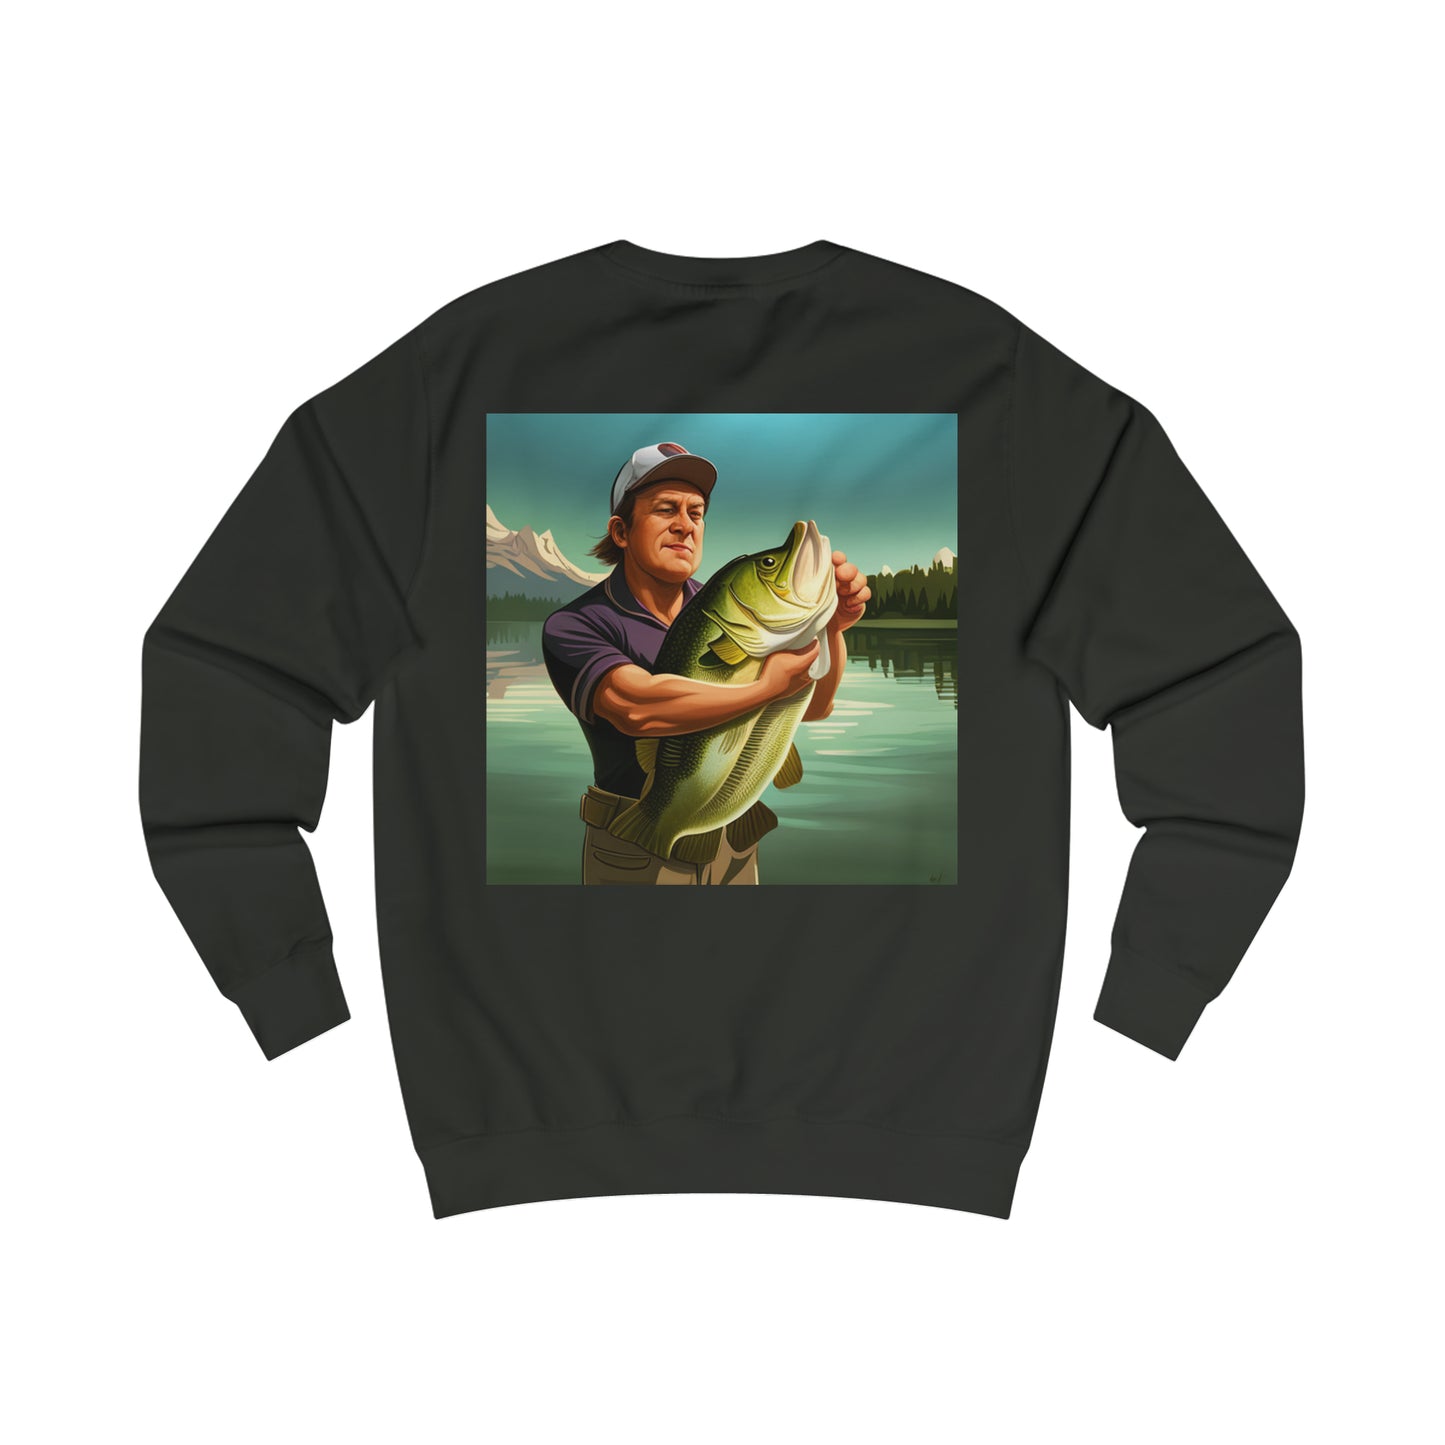 Men's Sweatshirt is customizable. Great gifts for him or her.